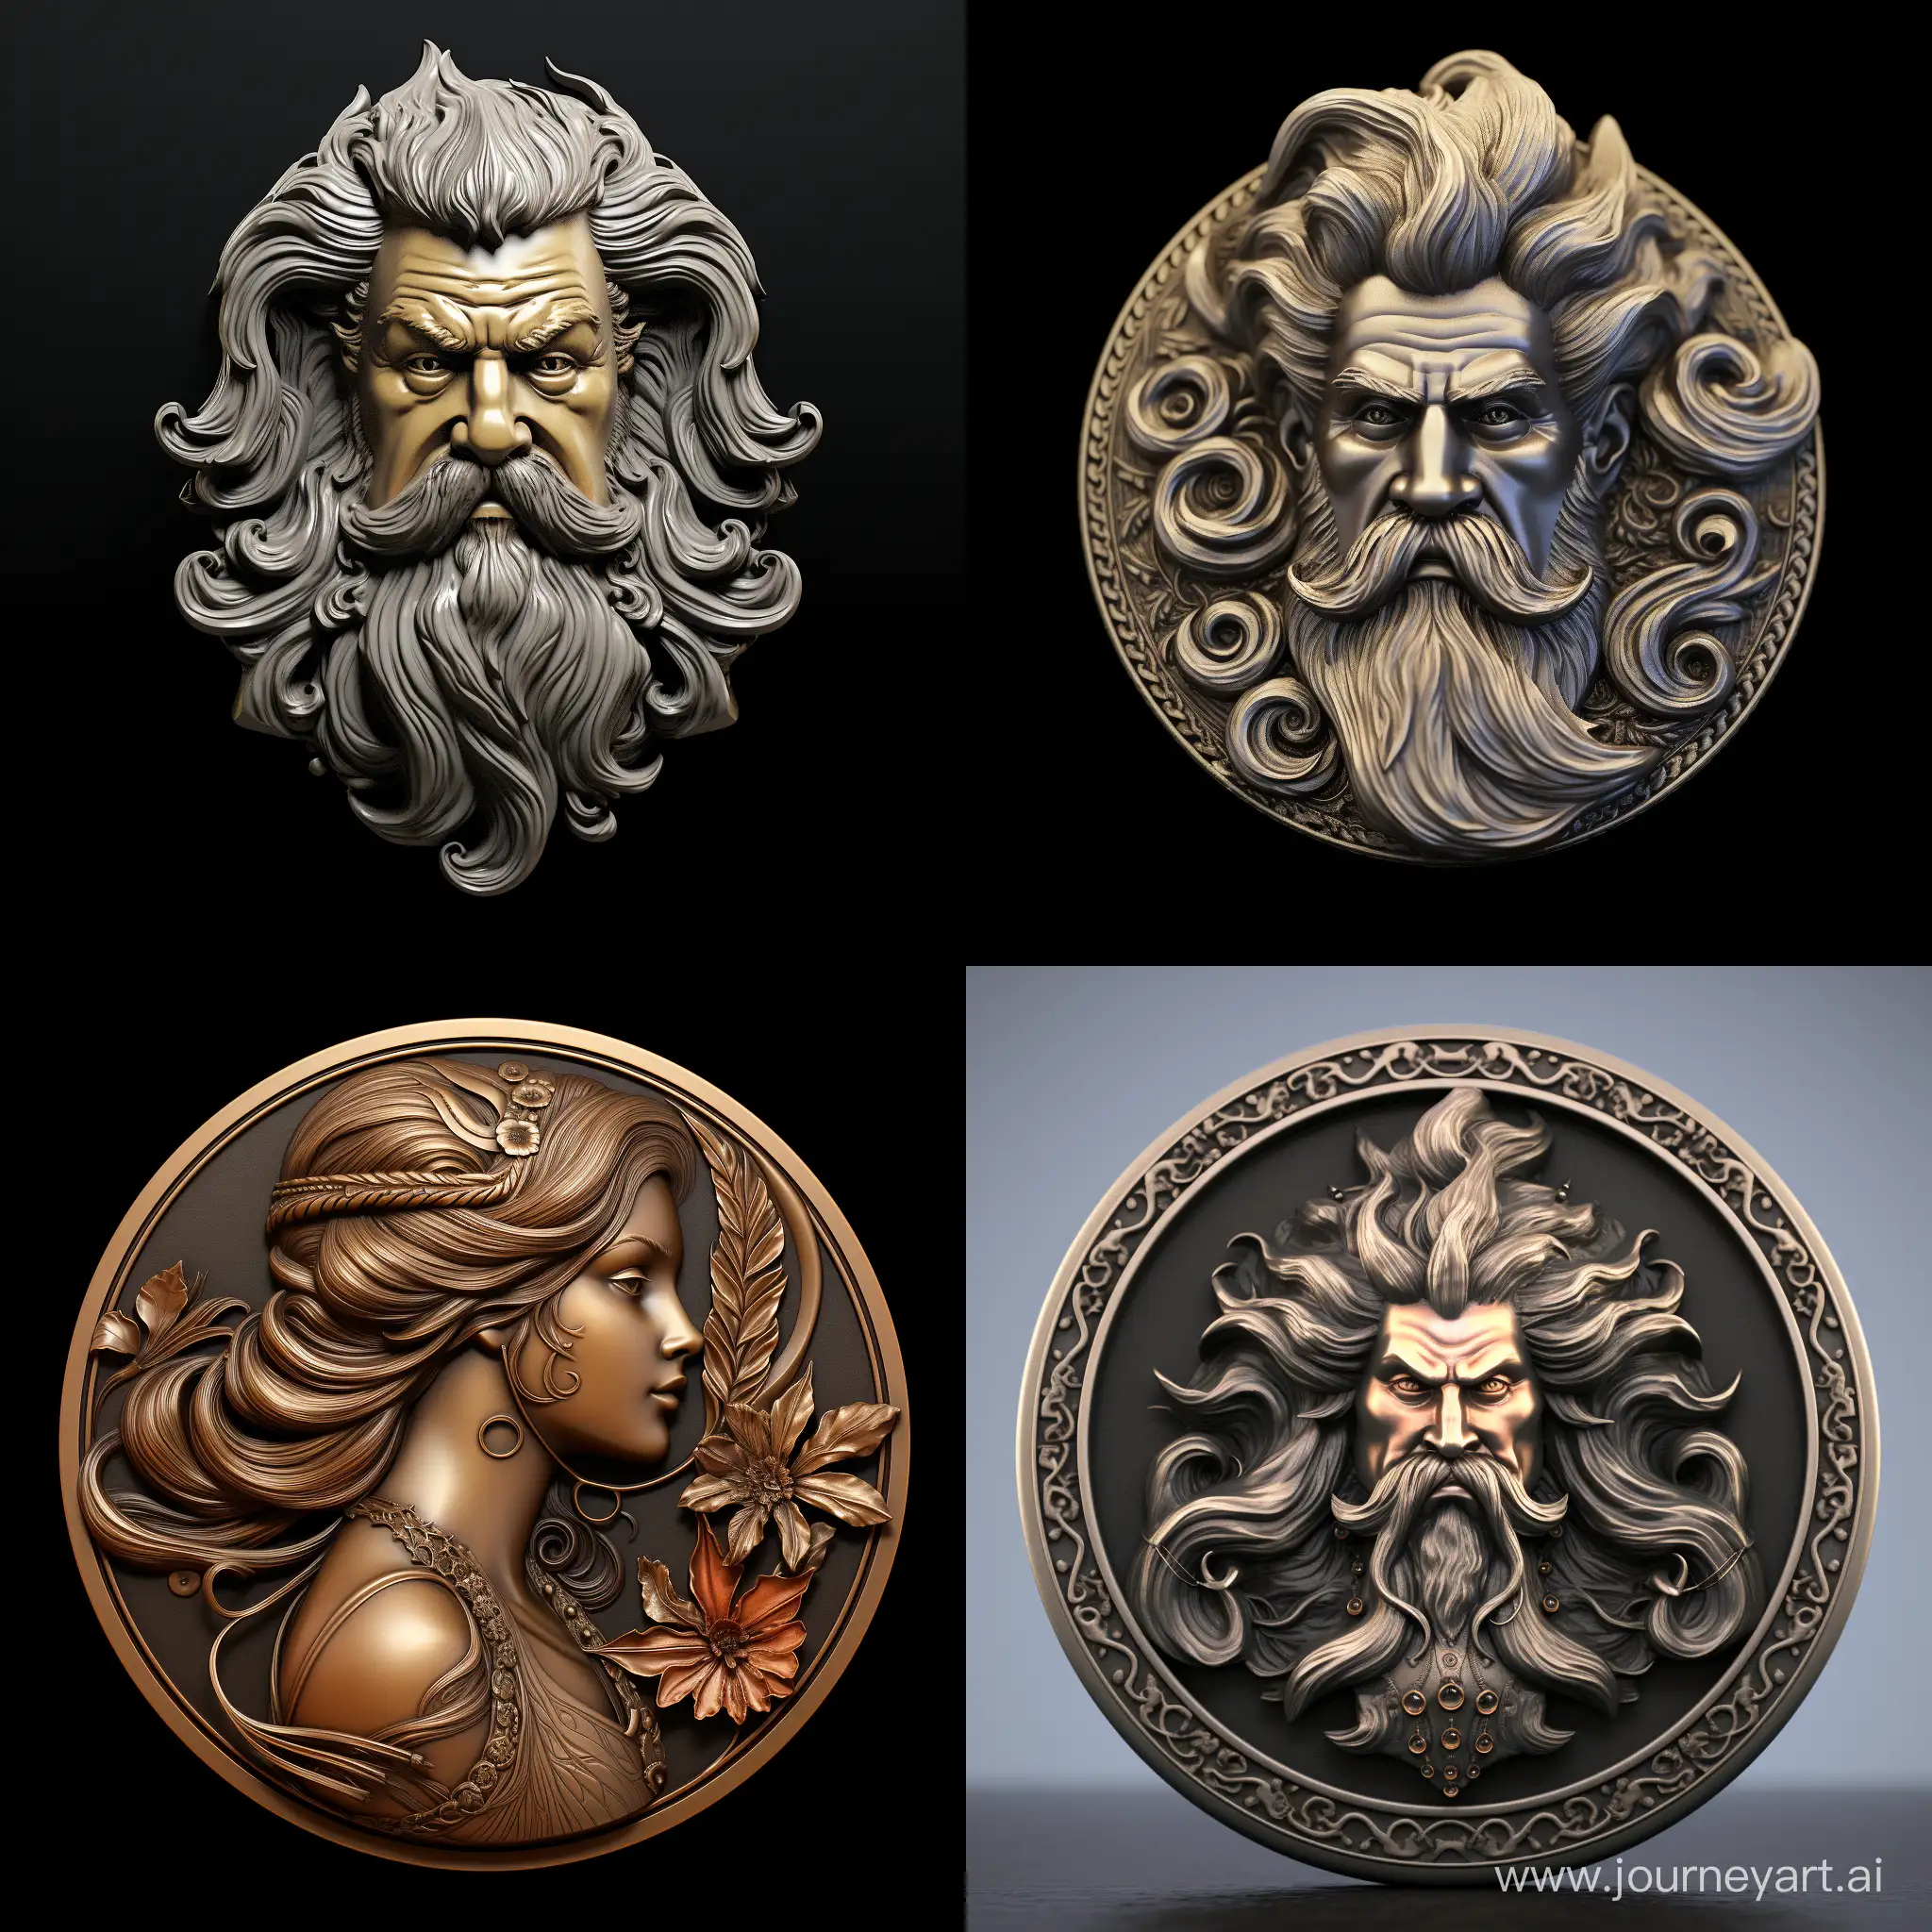 Exquisite-3D-Sculptures-Intricately-Designed-Coins-Faces-Bodies-and-Jewelry-Models